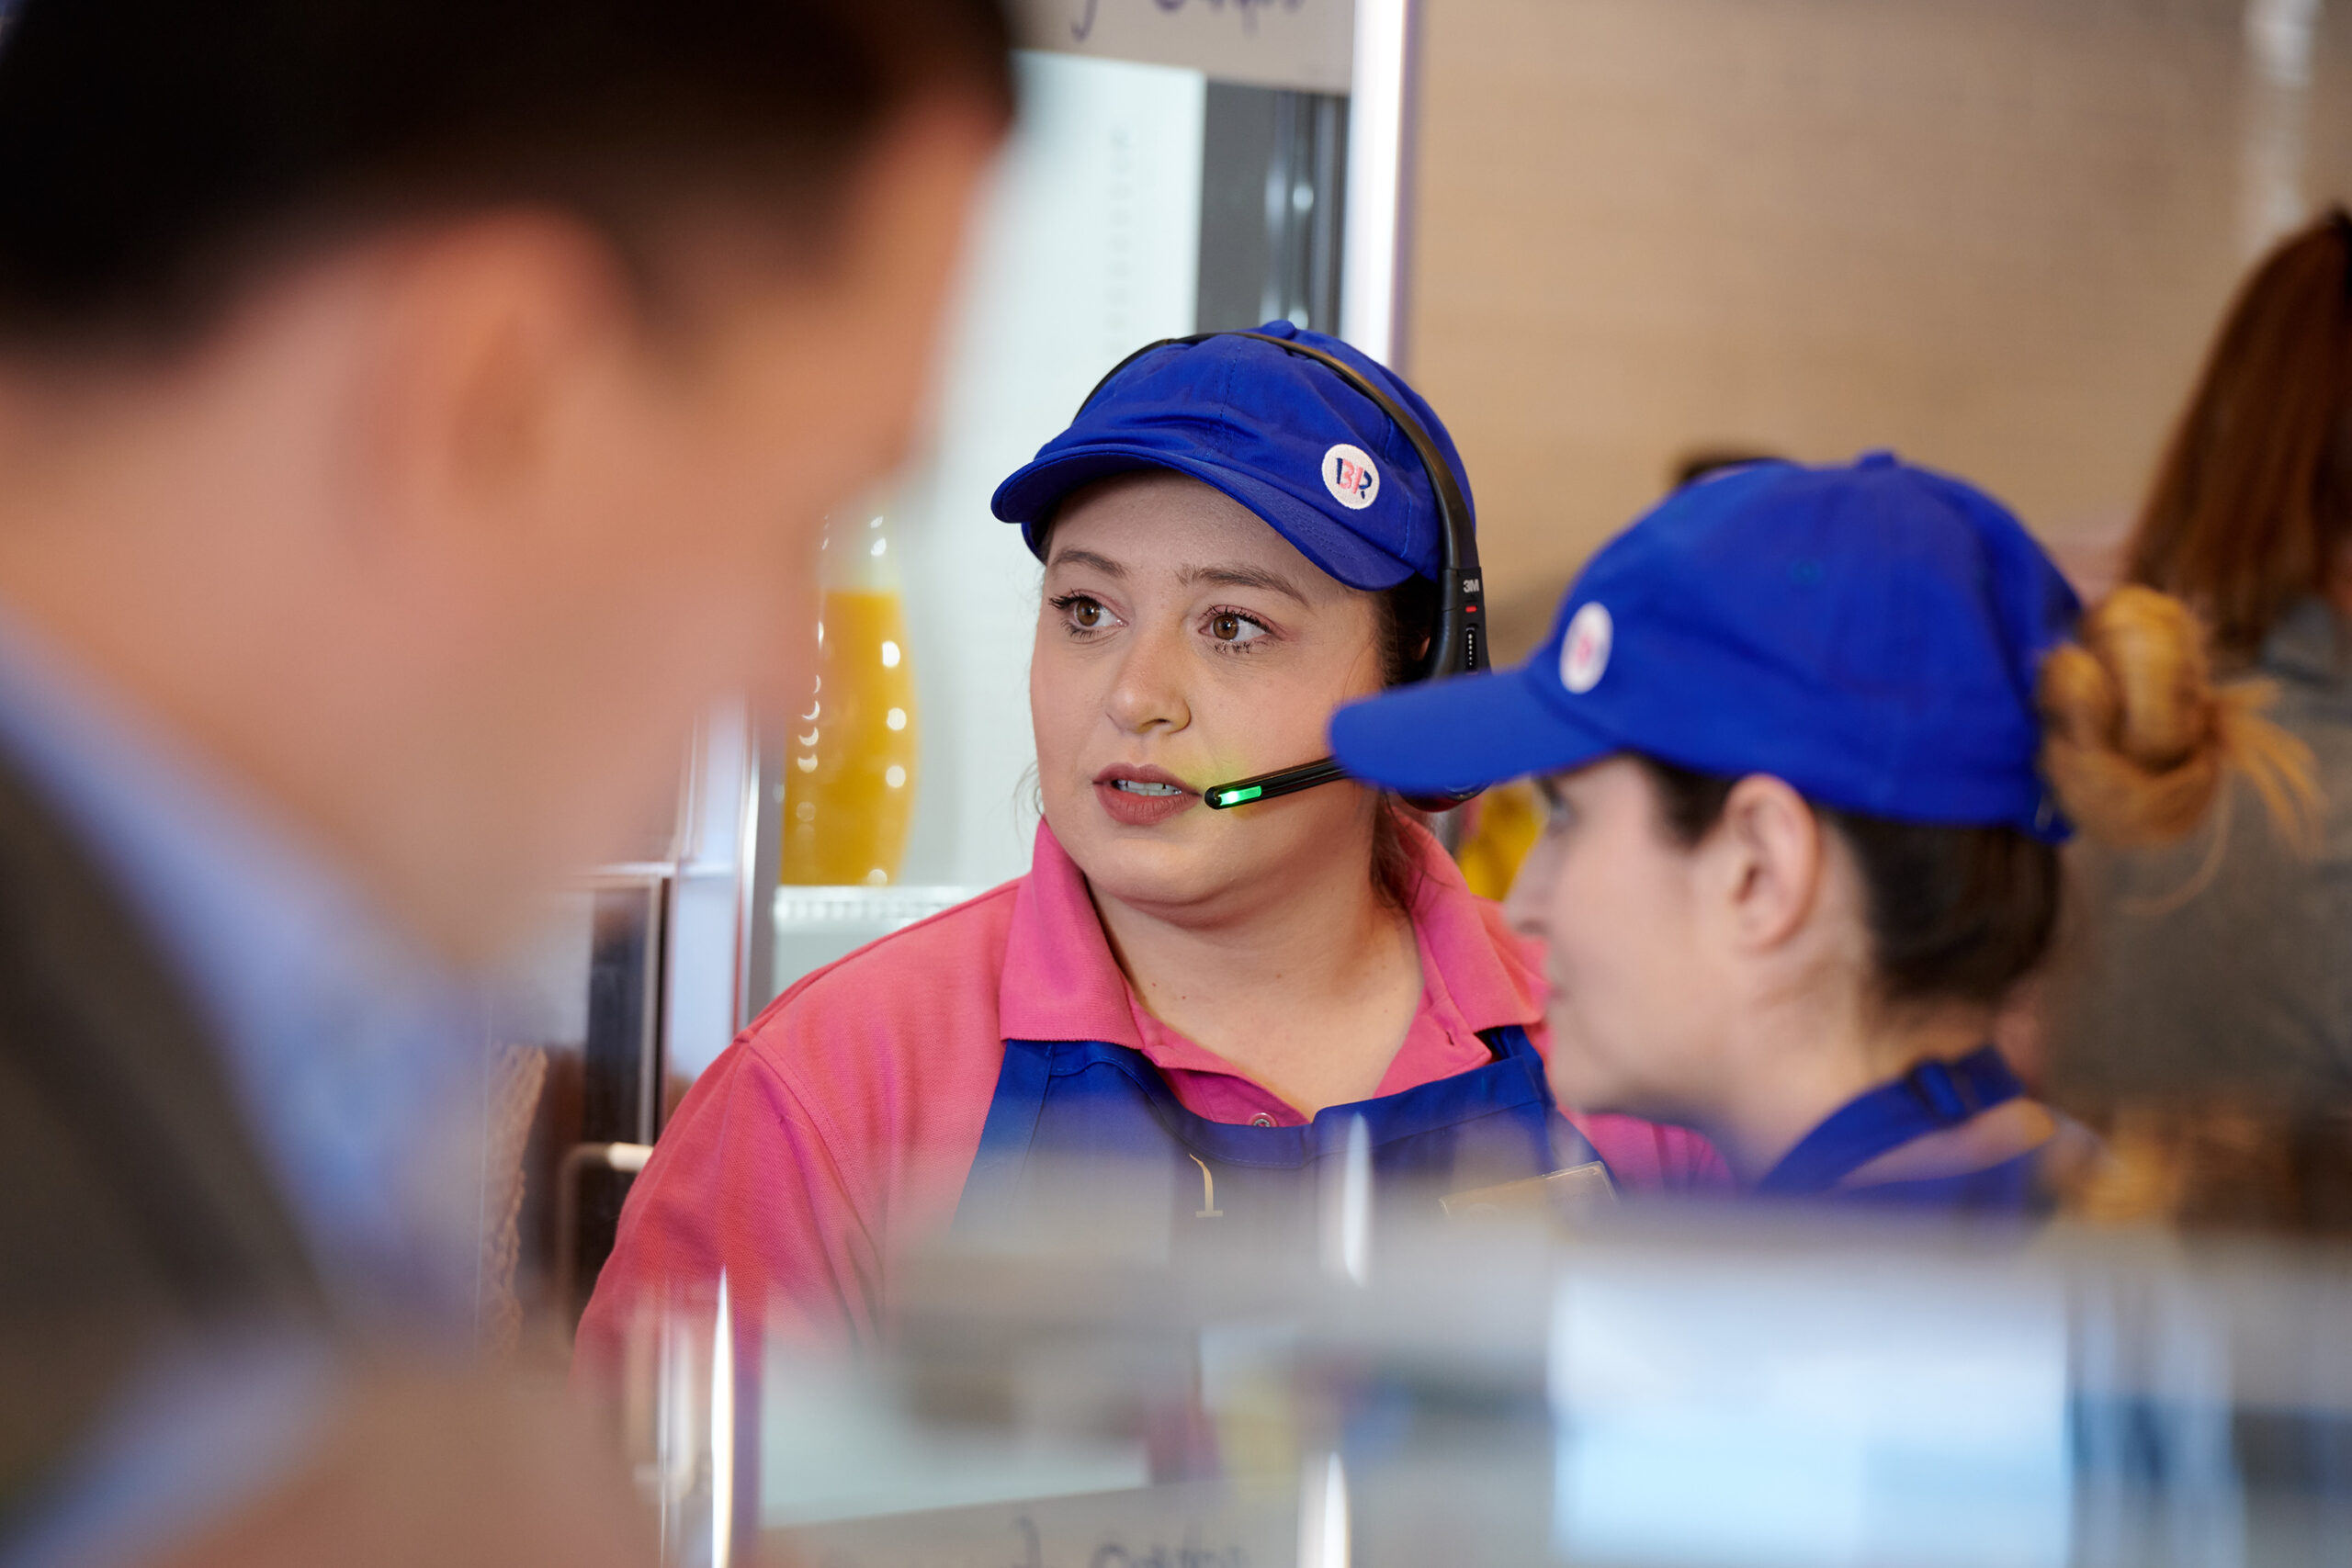 Staff interacting with the Baskin Robbins corporate employees.